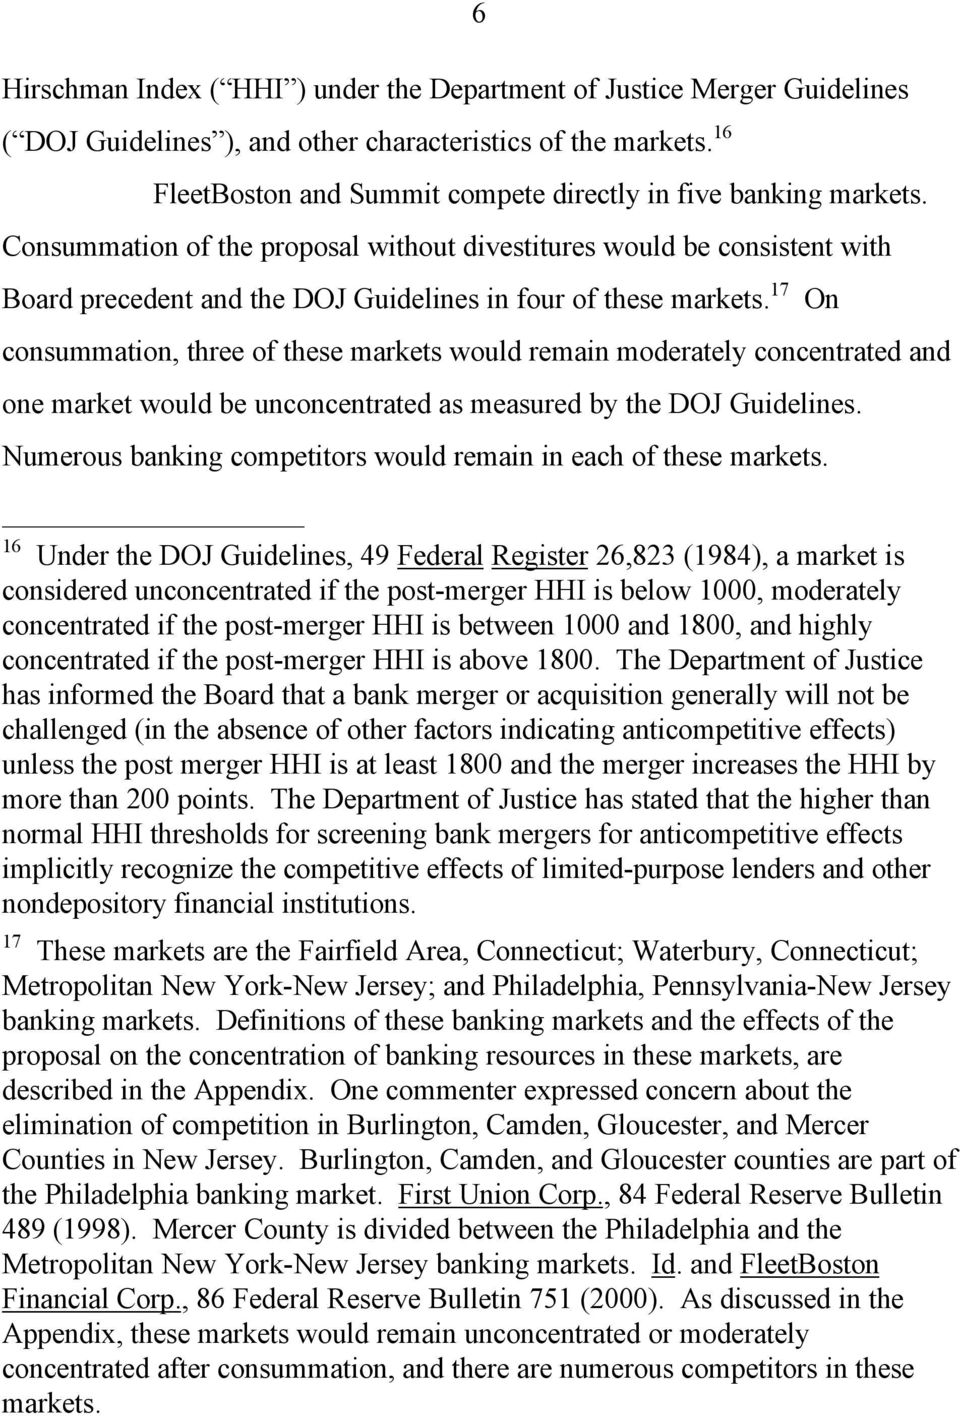 Consummation of the proposal without divestitures would be consistent with Board precedent and the DOJ Guidelines in four of these markets.